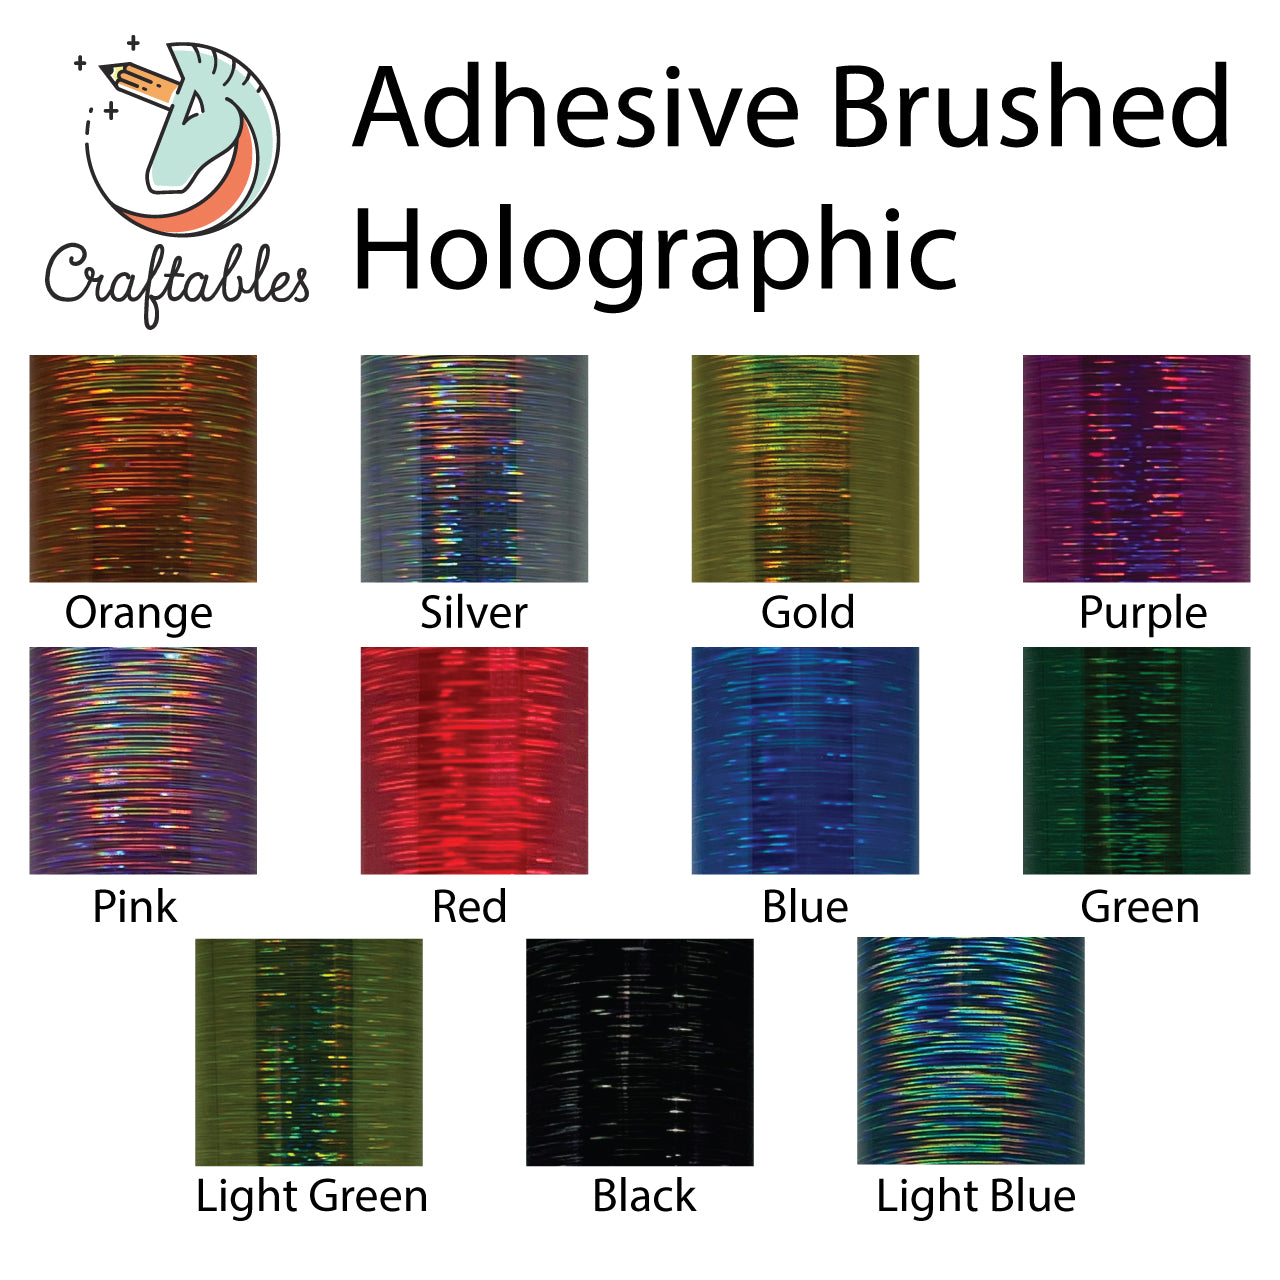 Green Brushed Holographic Adhesive Vinyl Rolls By Craftables